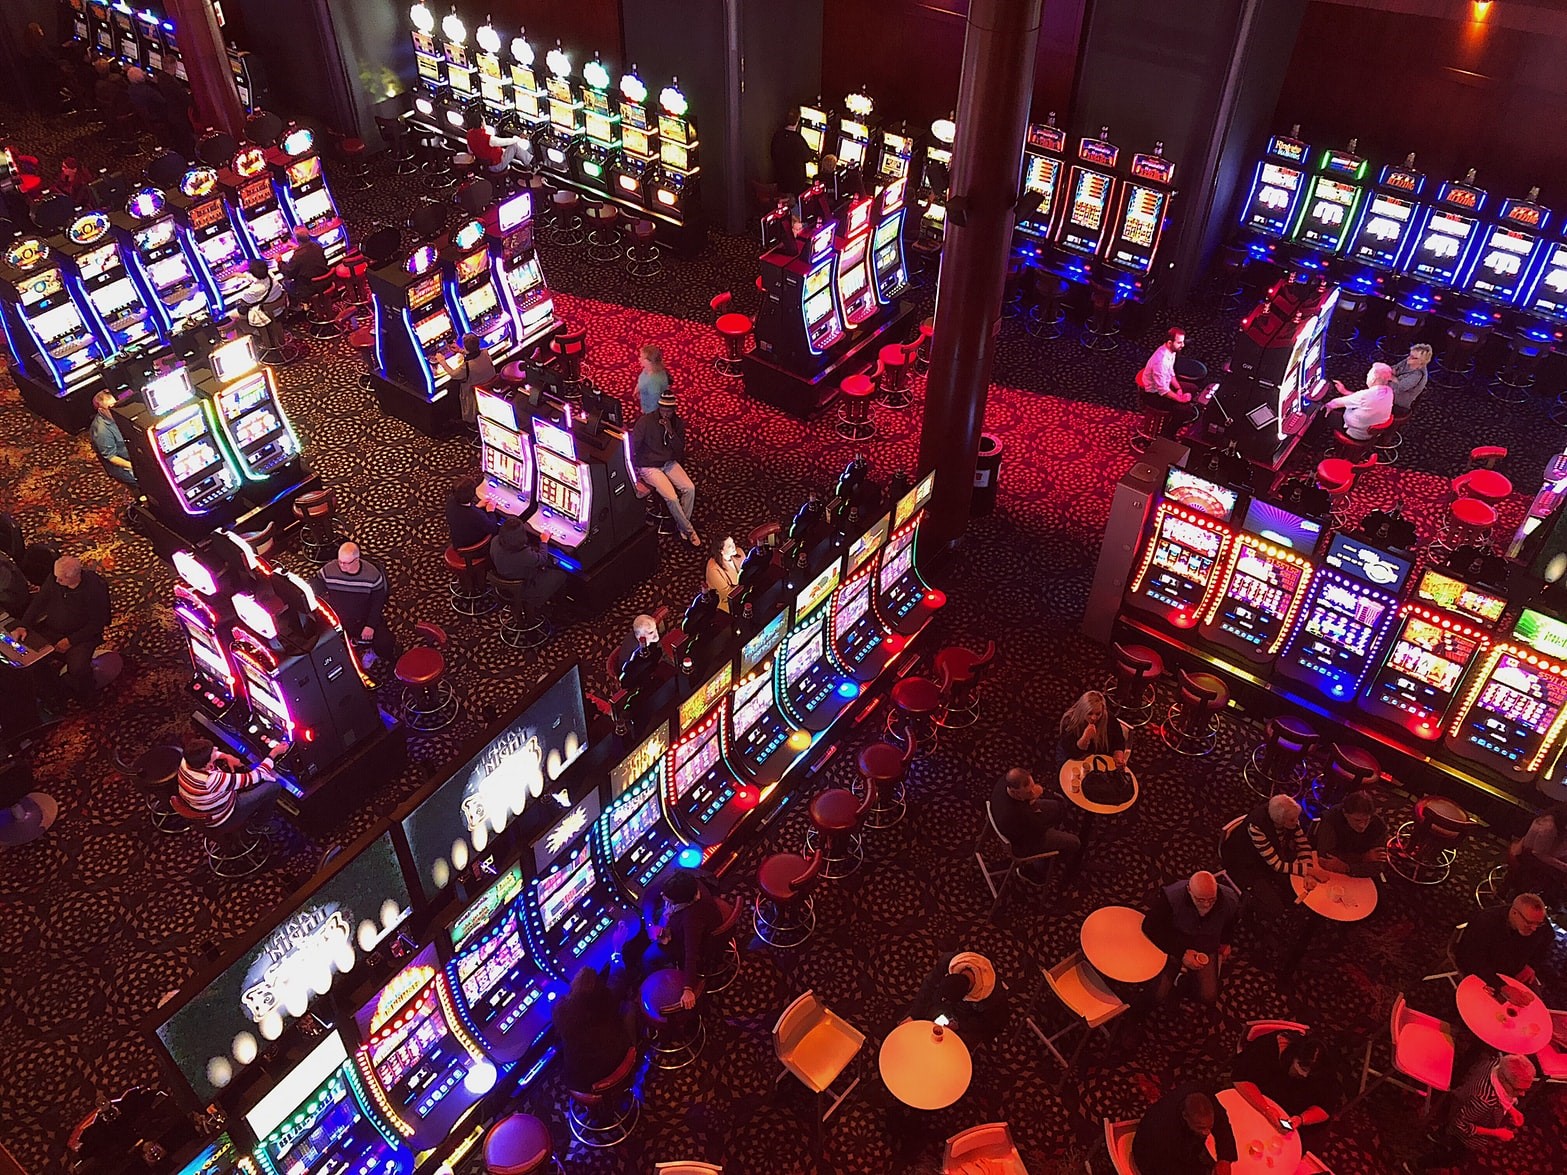 Casinos could utilise these technology solutions